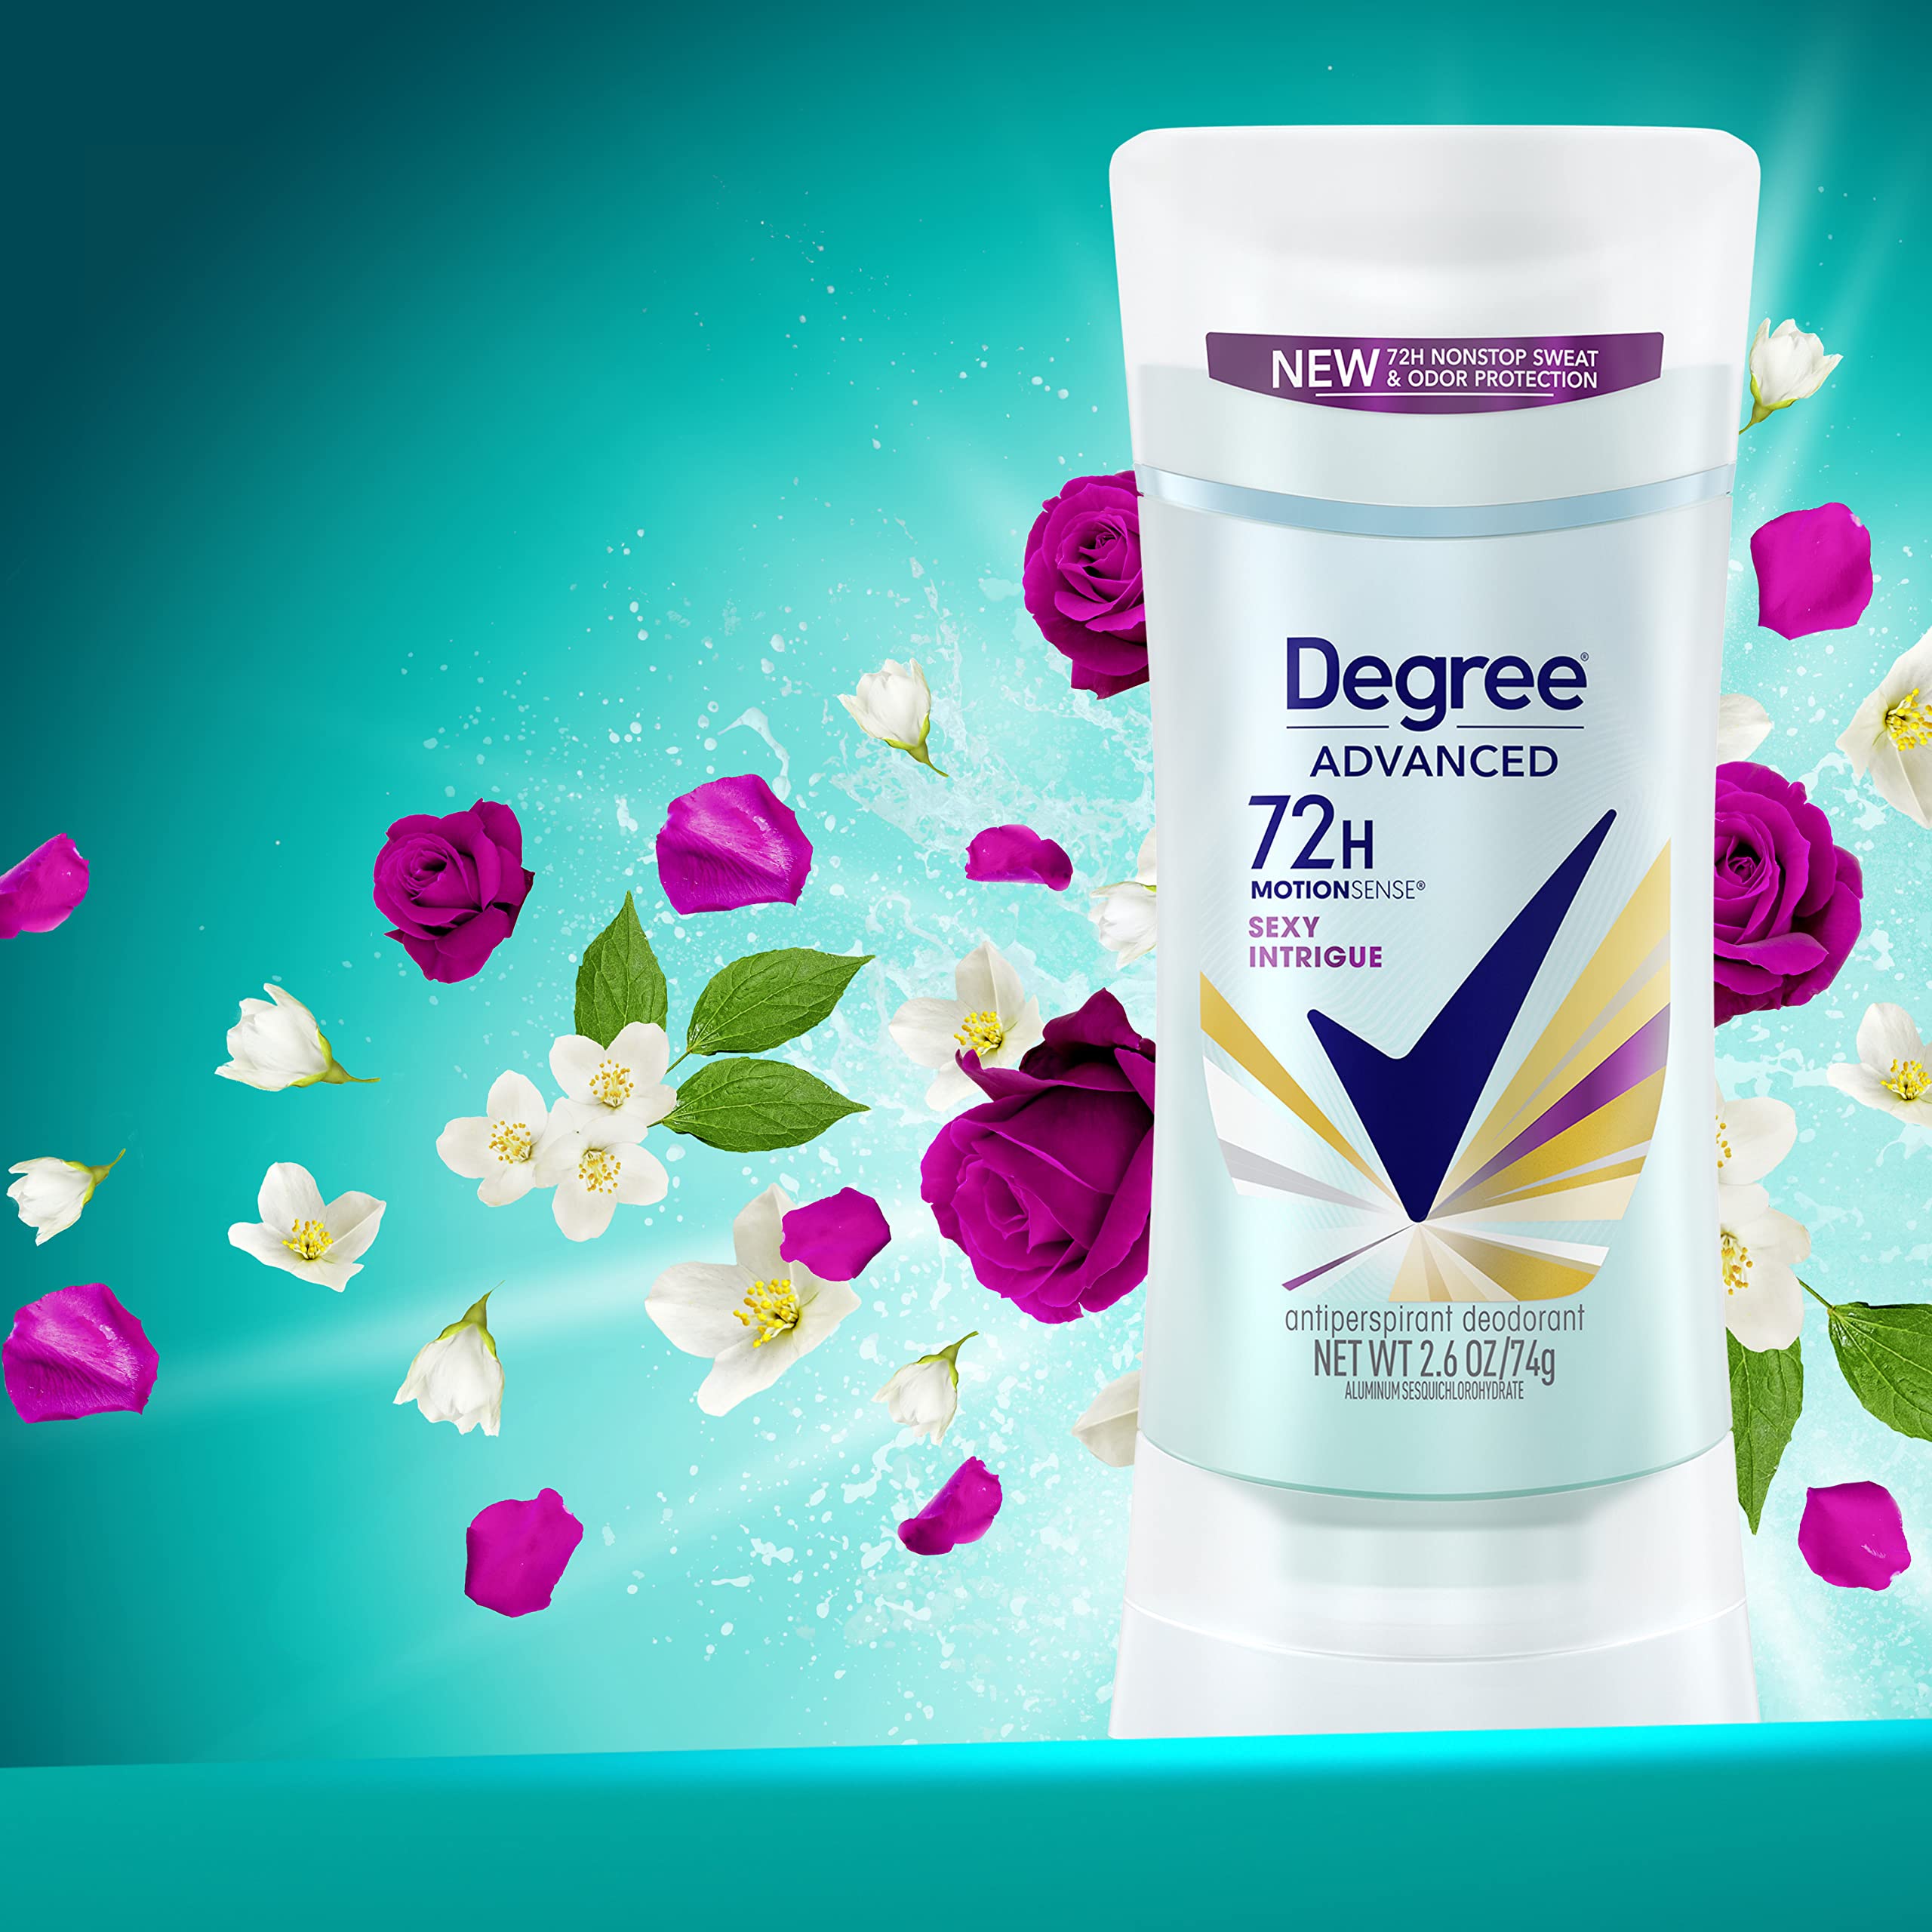 Degree Advanced MotionSense Antiperspirant Deodorant 72-Hour Sweat And Odor Protection Sexy Intrigue Antiperspirant Deodorant For Women With MotionSense Technology, 2.6 Ounce (Pack of 4)